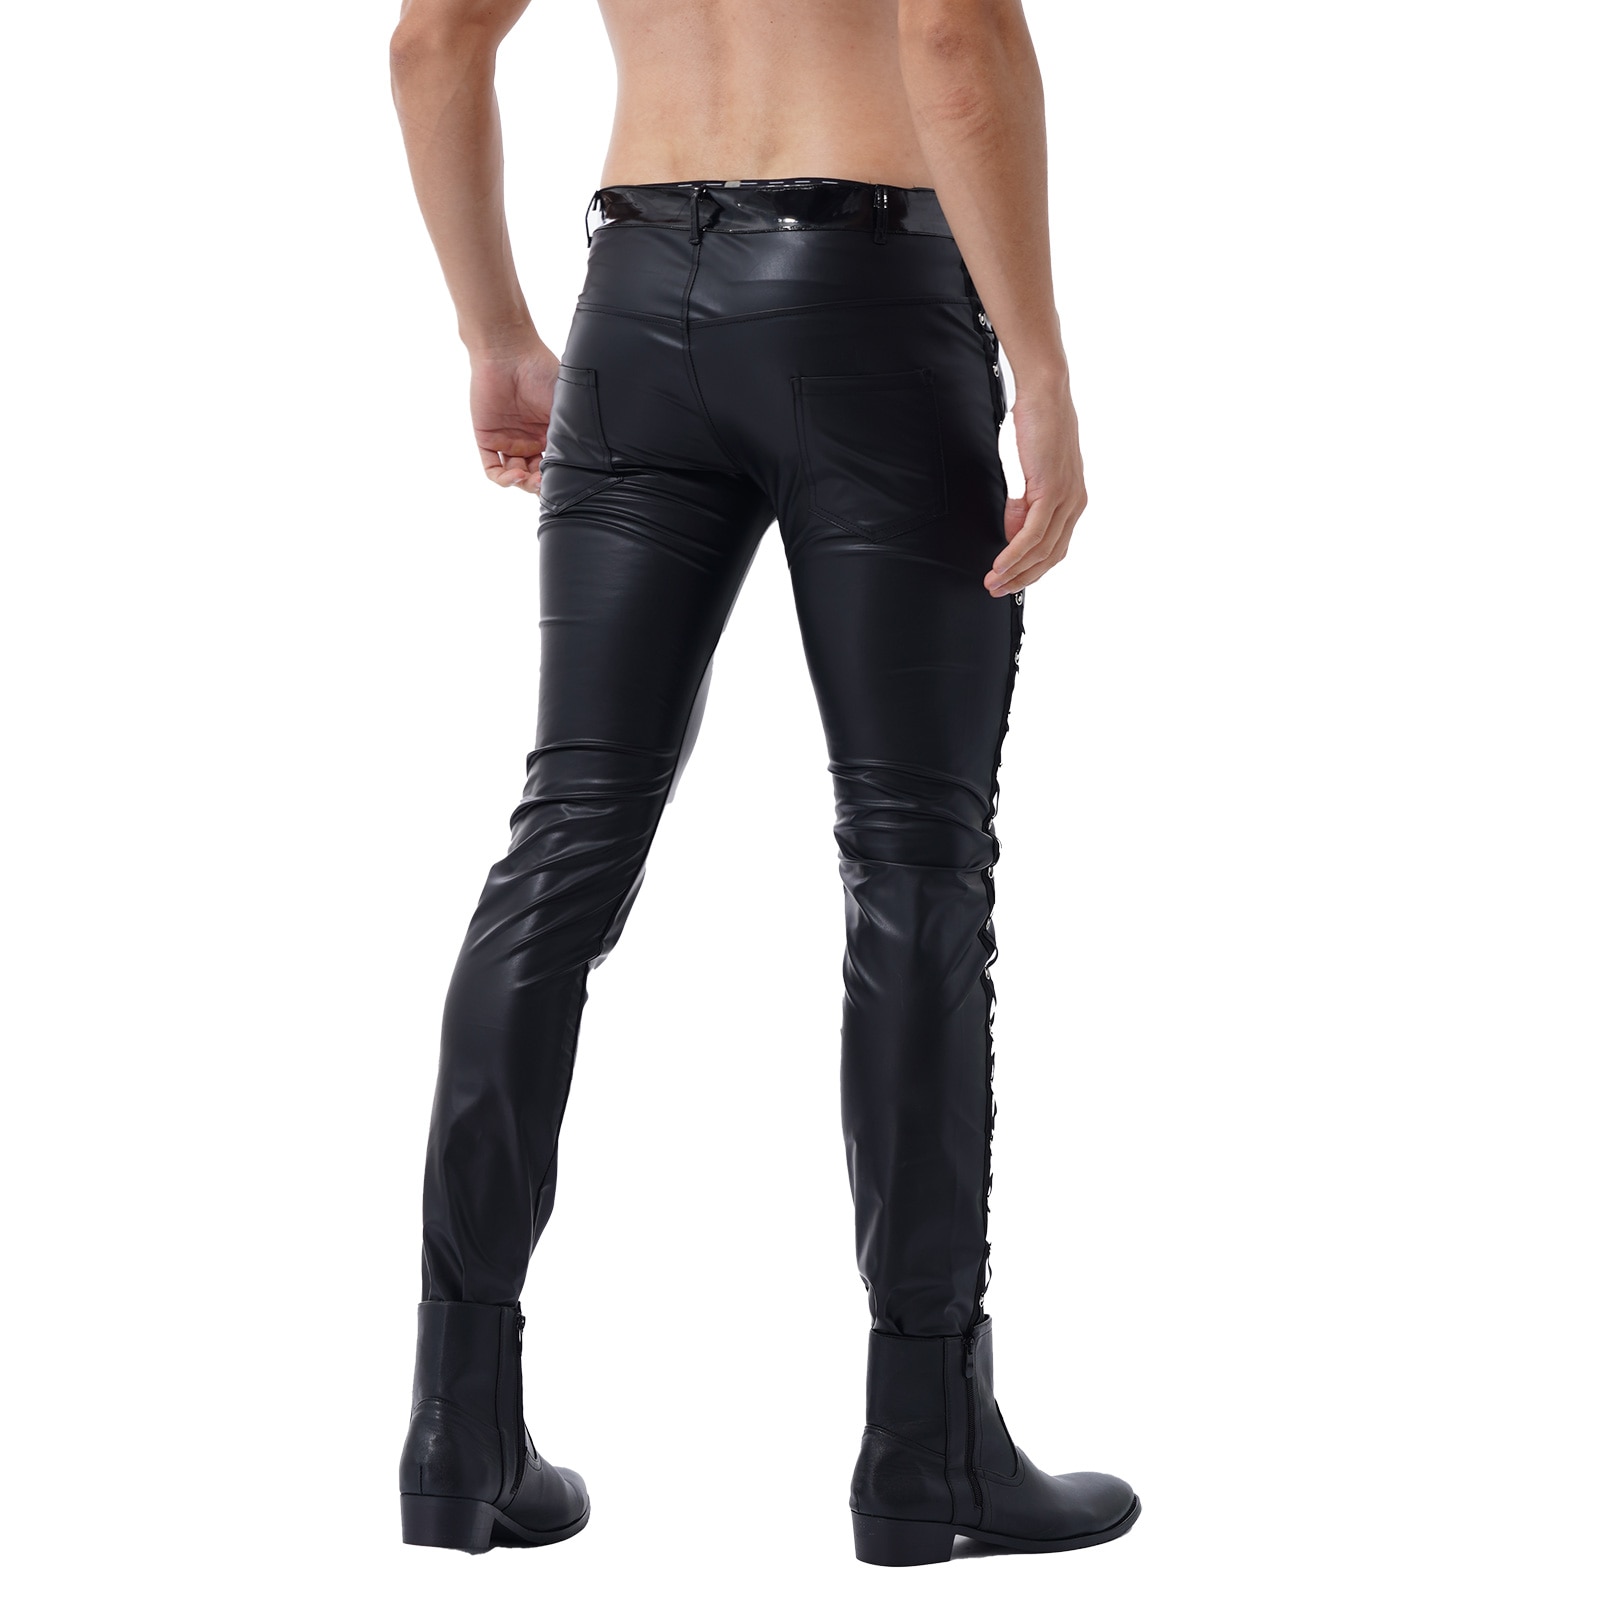 Men Latex Leather Pants Low Waist Faux Leather Shiny Pants Fashion Tight Trousers for Club Stage Show Rock Band Performance